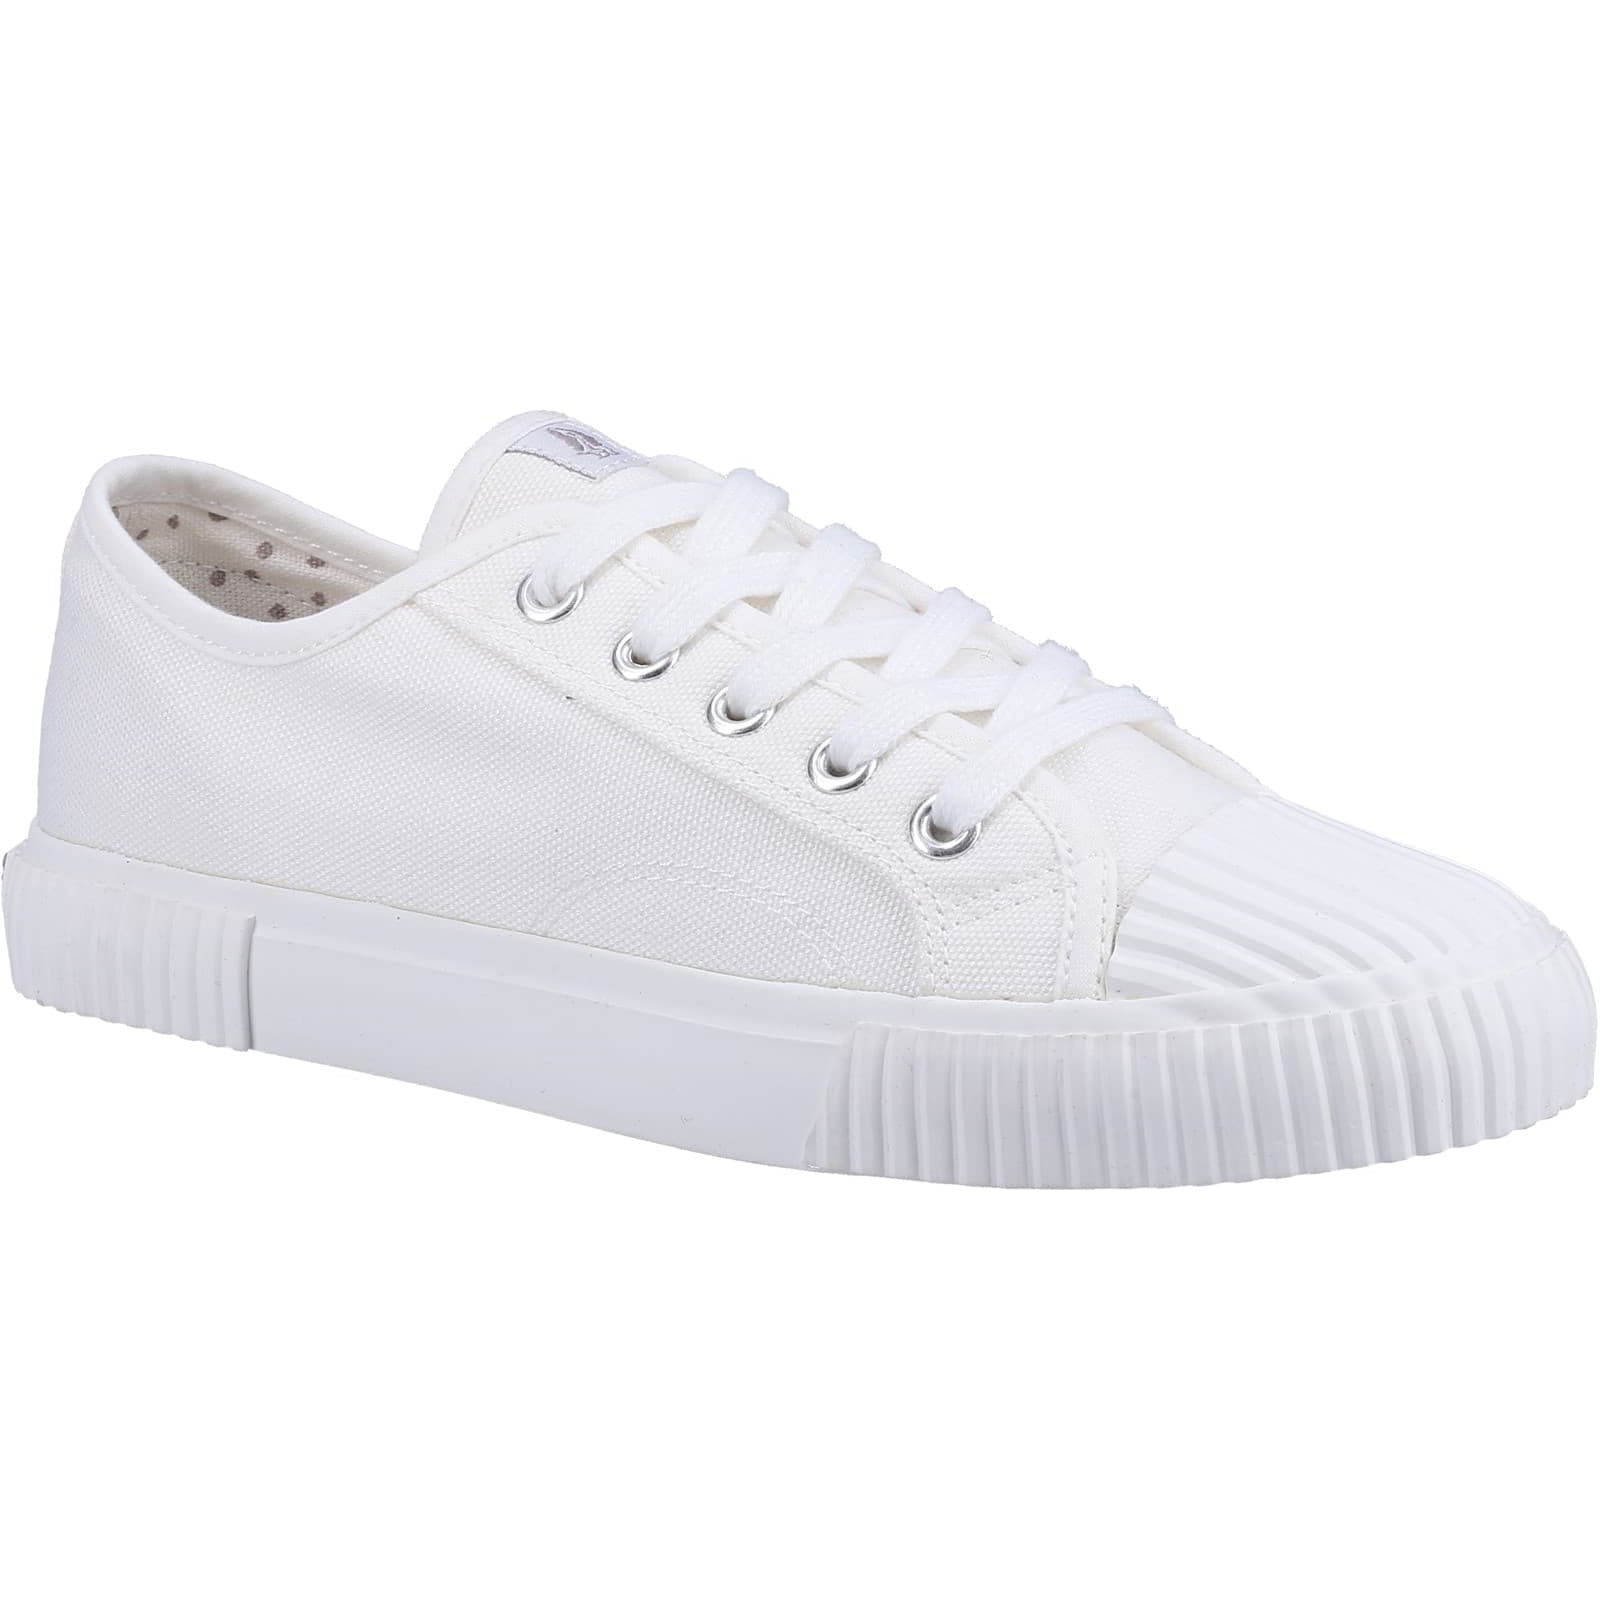 Hush Puppies Women's Brooke Lace Up Canvas Shoes Trainers - UK 8